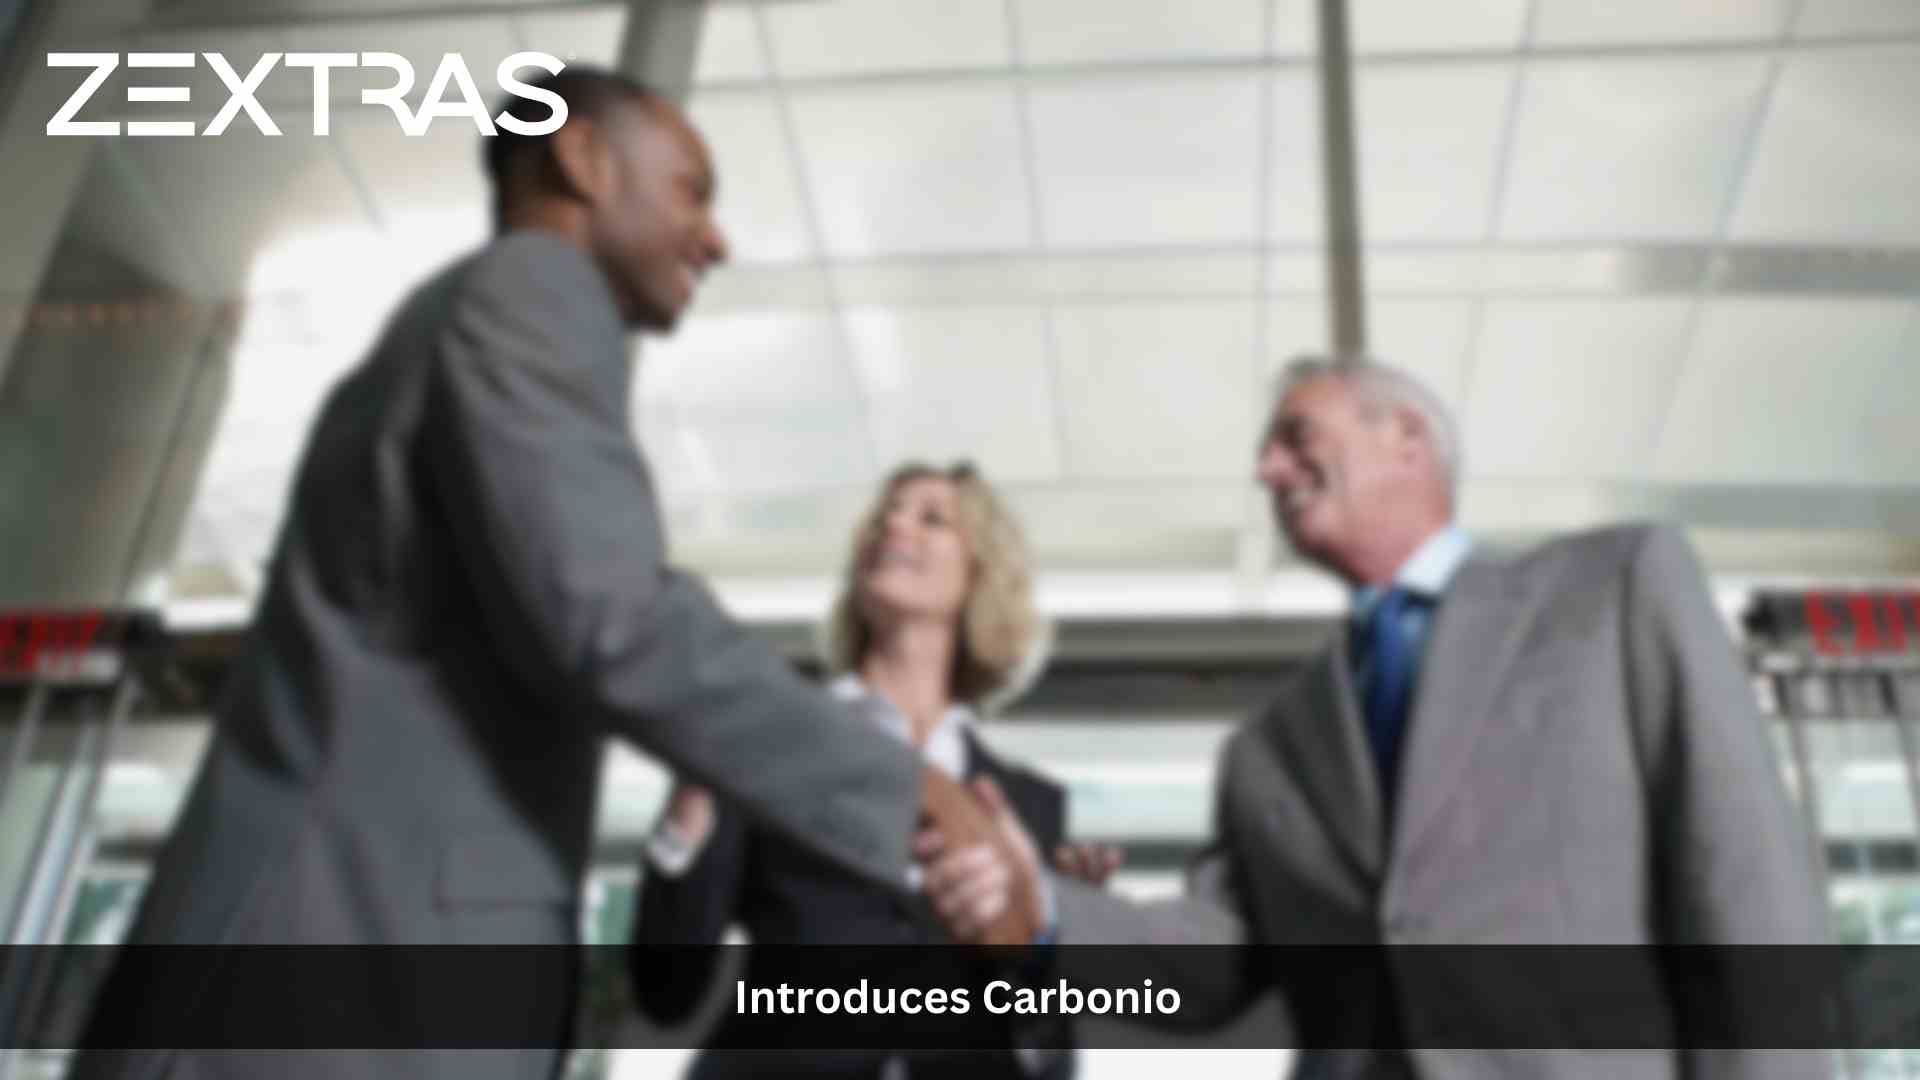 Zextras Introduces Carbonio - A Private Digital Workplace